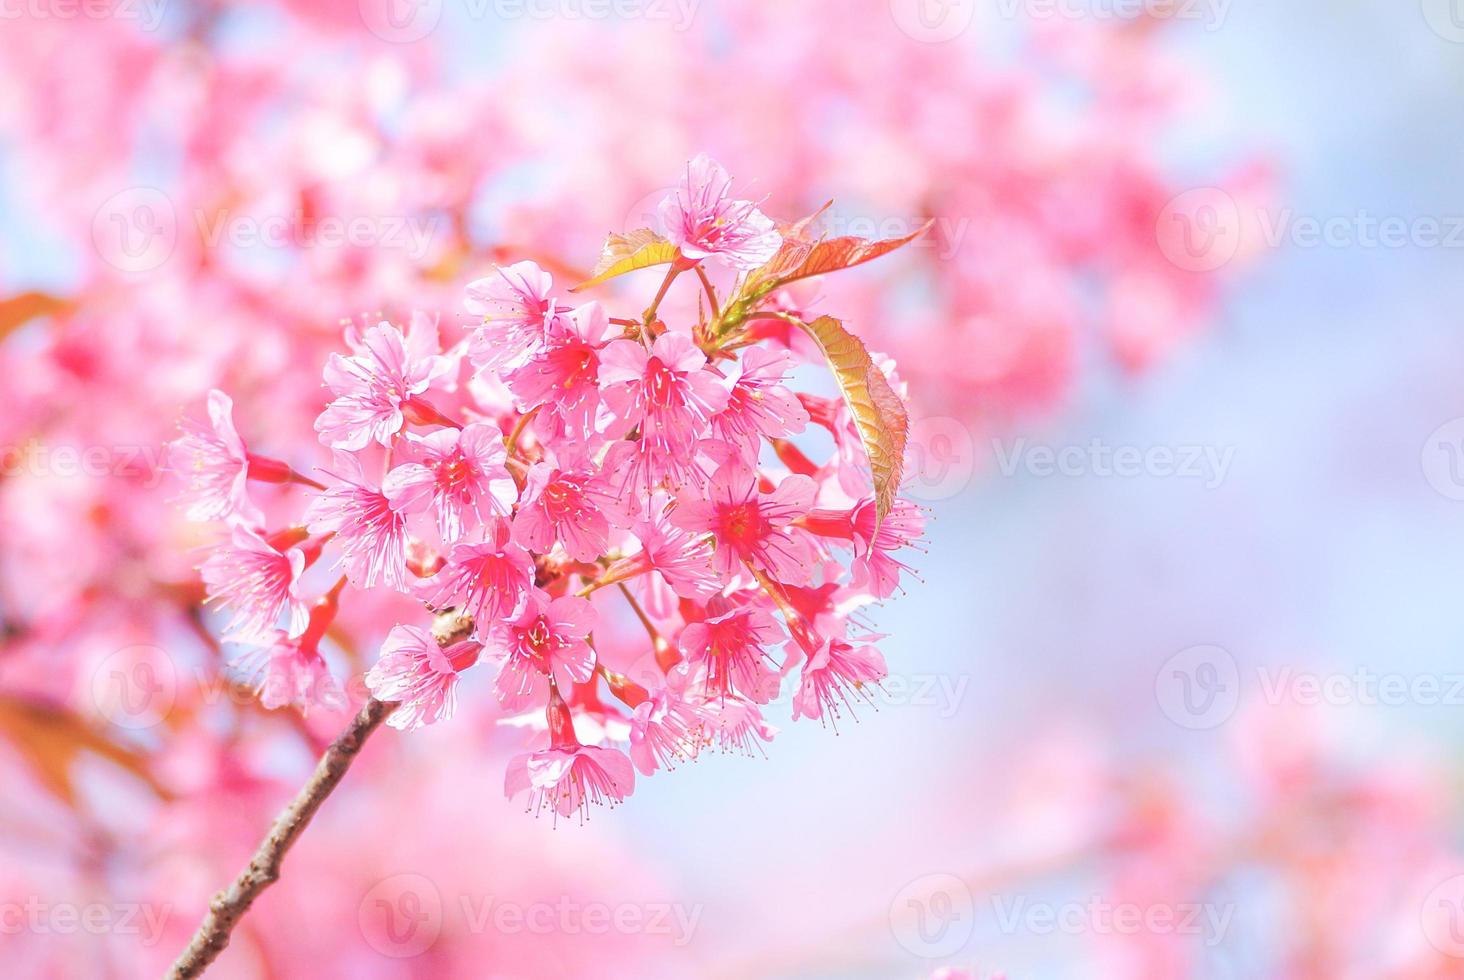 Cherry Blossom in spring with soft focus, unfocused blurred spring cherry bloom, bokeh flower background, pastel and soft flower background. photo